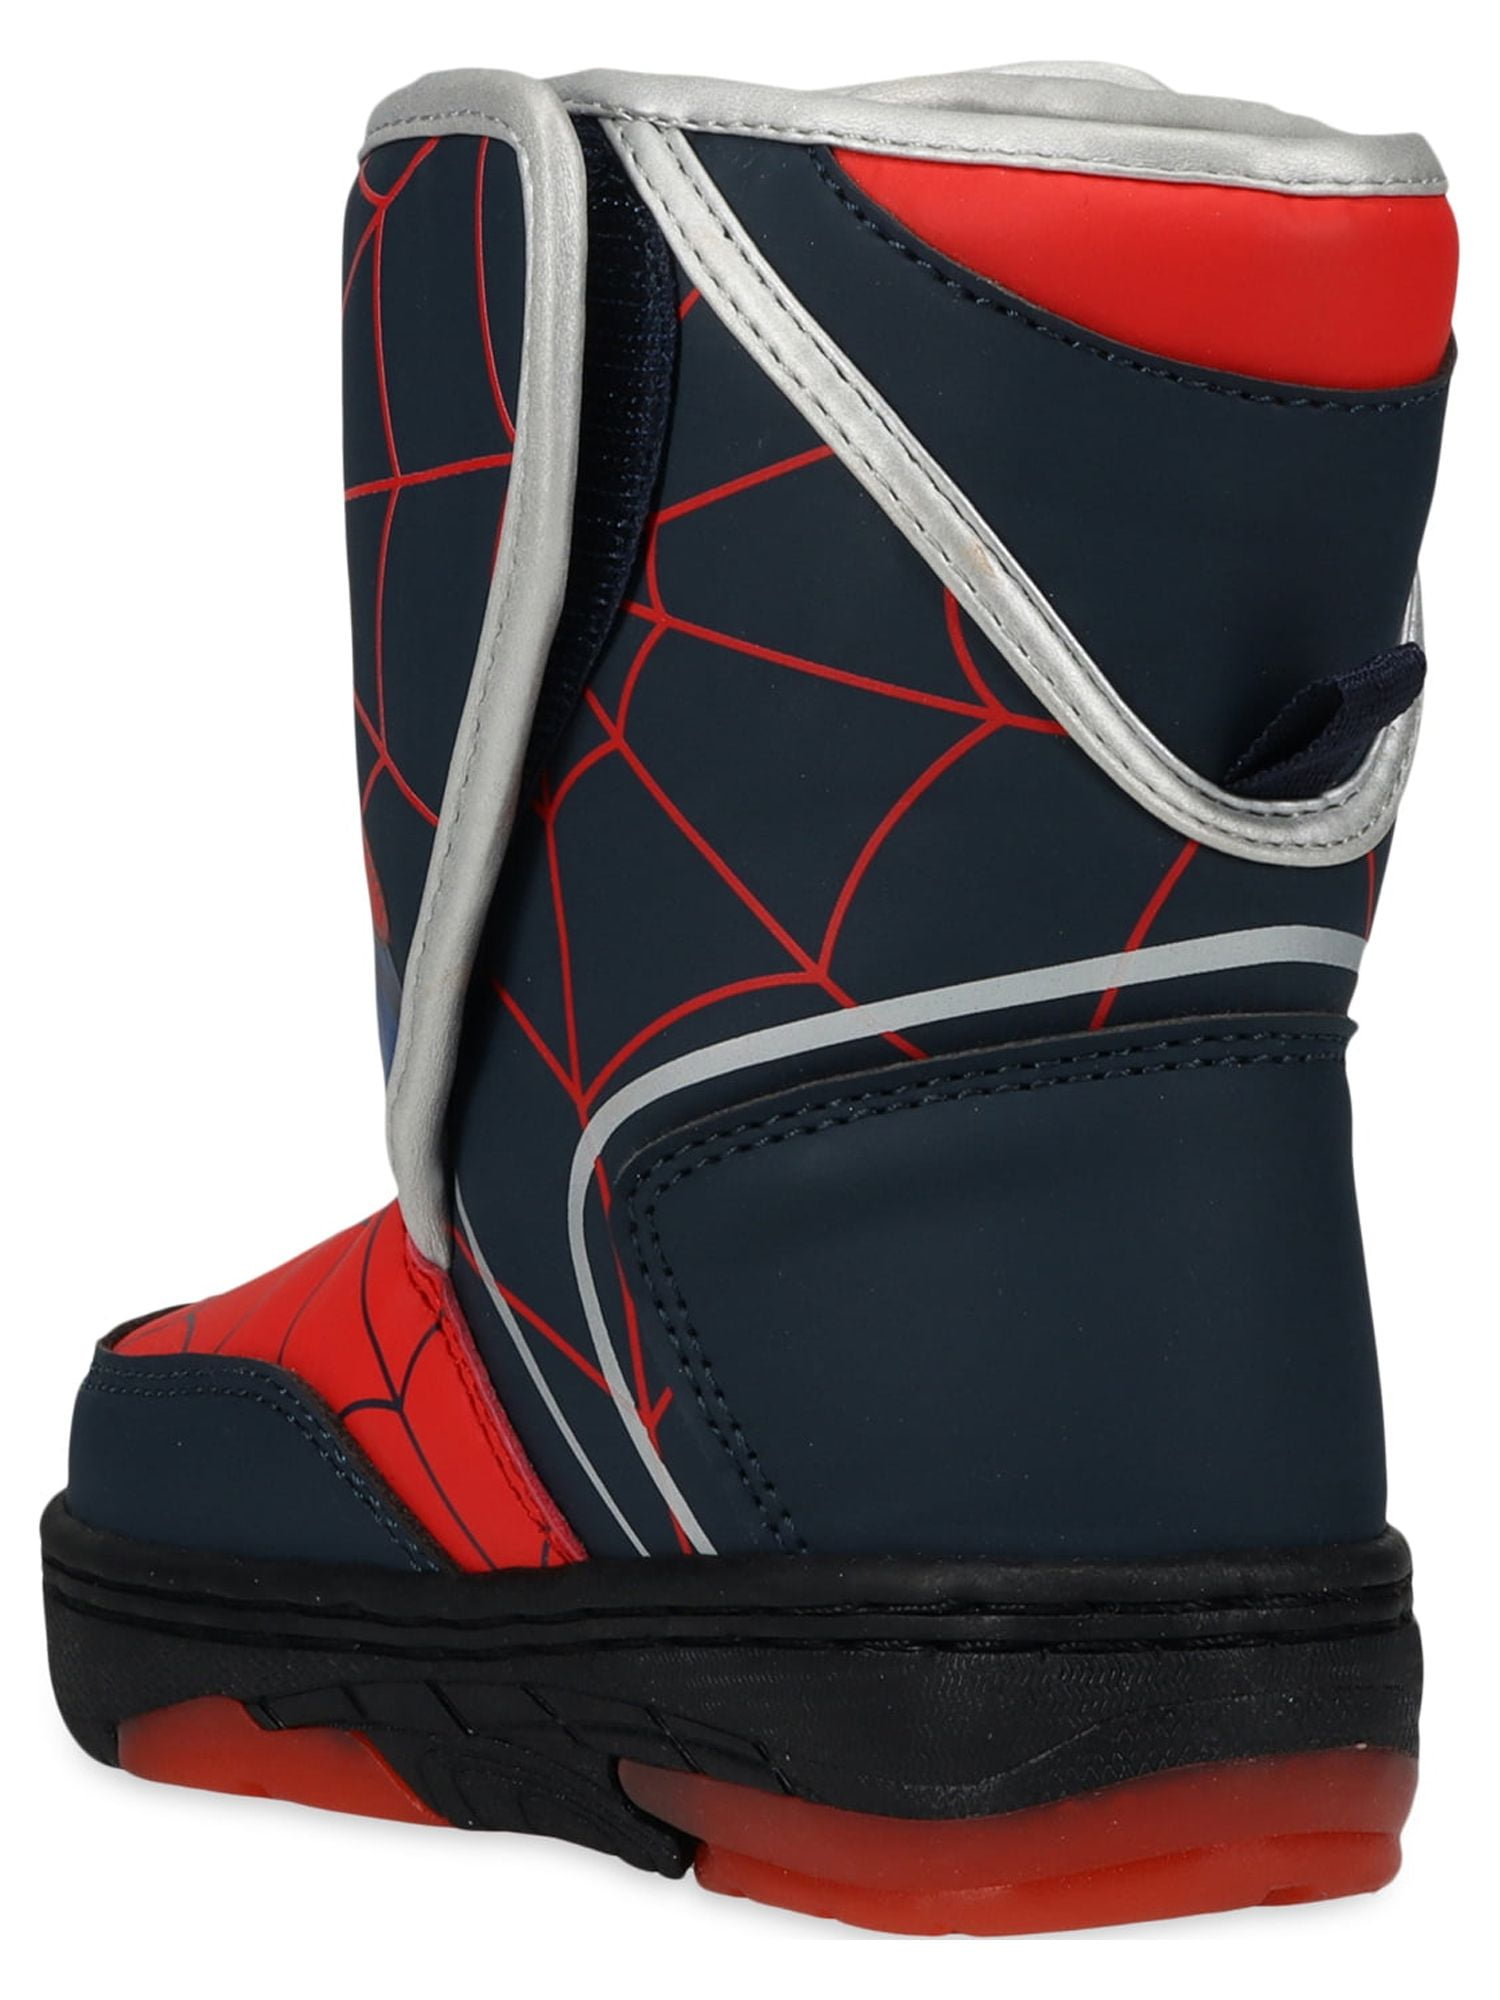 Spiderman Toddler Boys Light Up Winter Snow Boots, Sizes 7-12